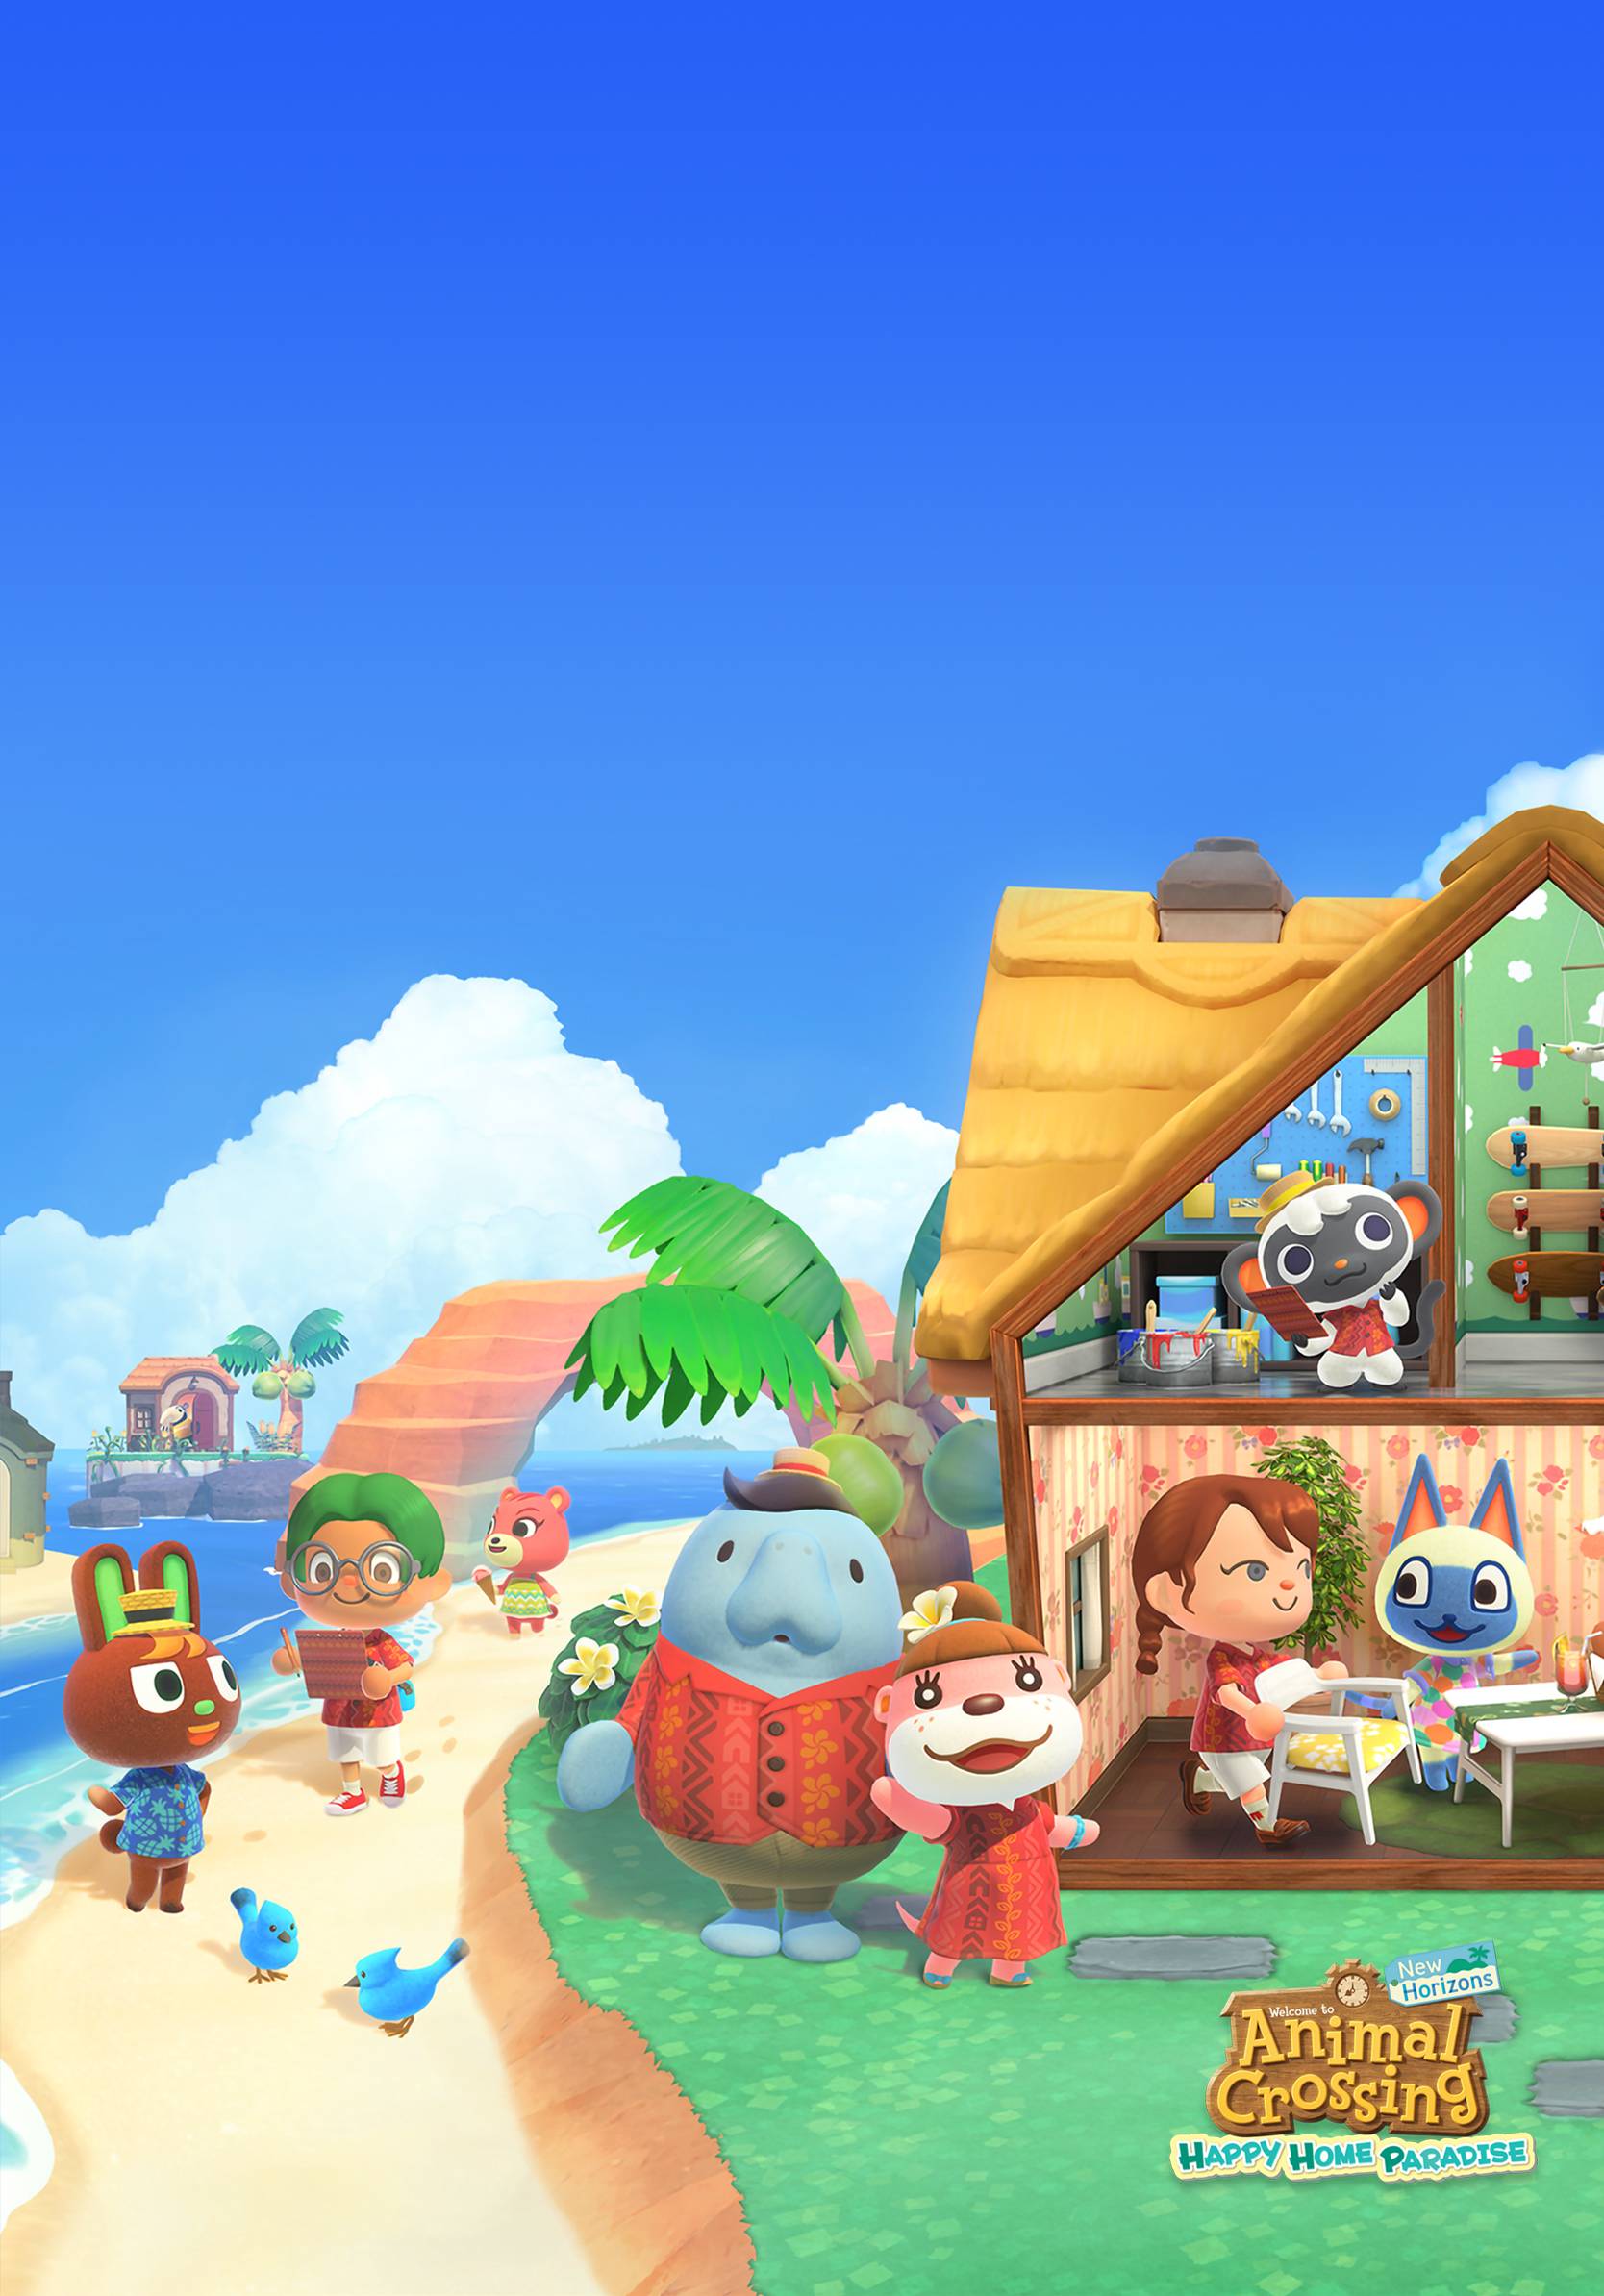 Animal Crossing: New Horizons Home Paradise Wallpaper with Monocle